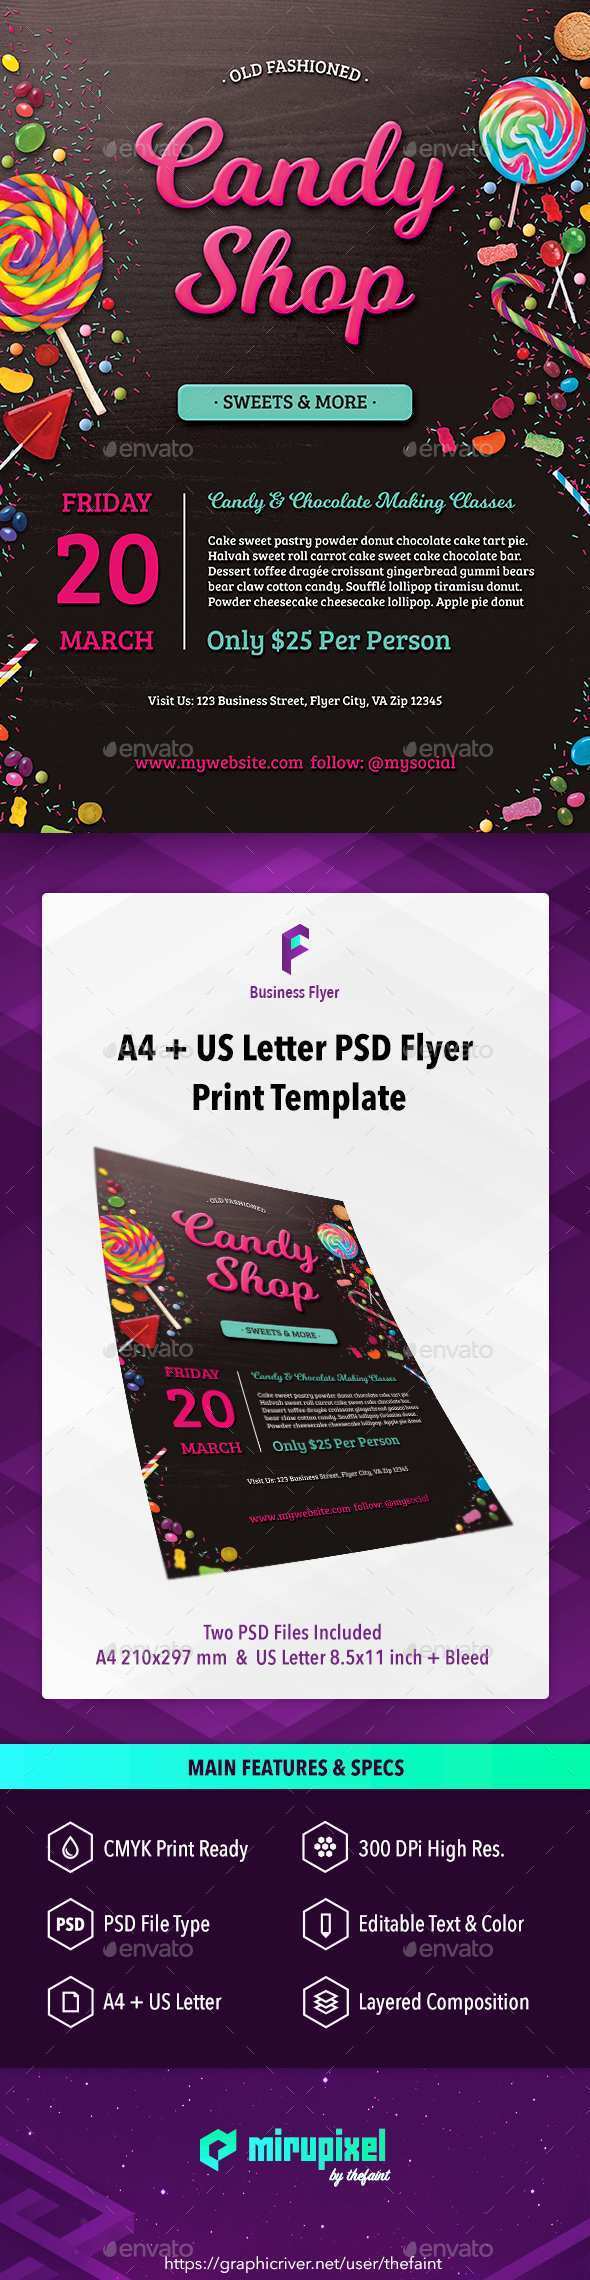 45 Printable Cheesecake Flyer Templates in Word by Cheesecake Flyer Templates